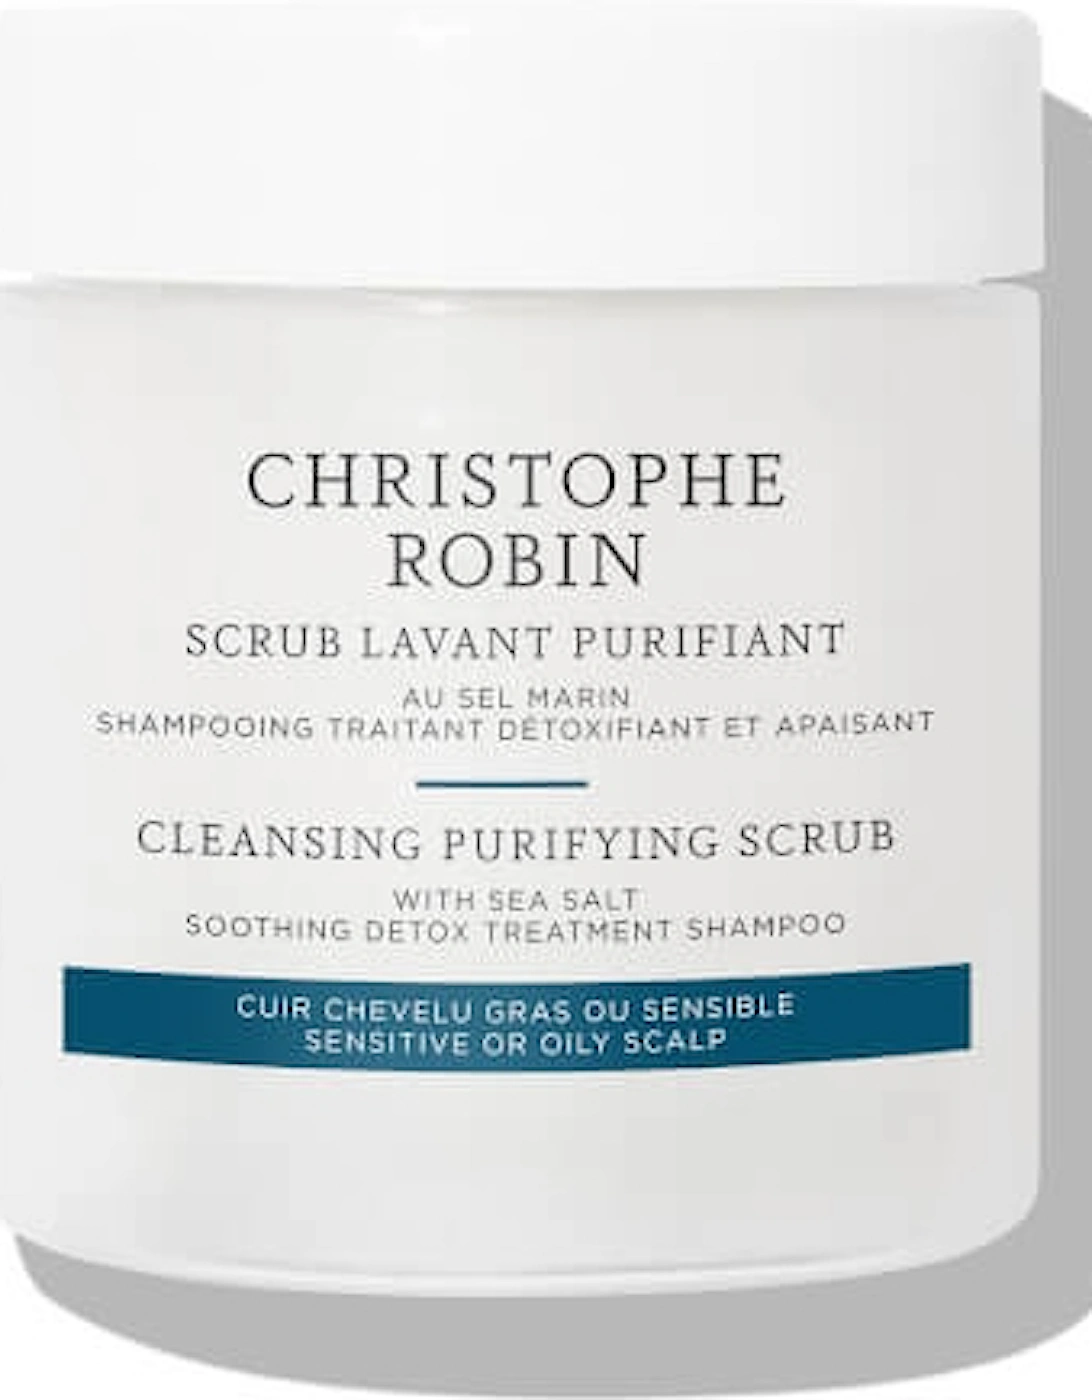 Cleansing Purifying Scrub with Sea Salt 75ml - Christophe Robin, 2 of 1